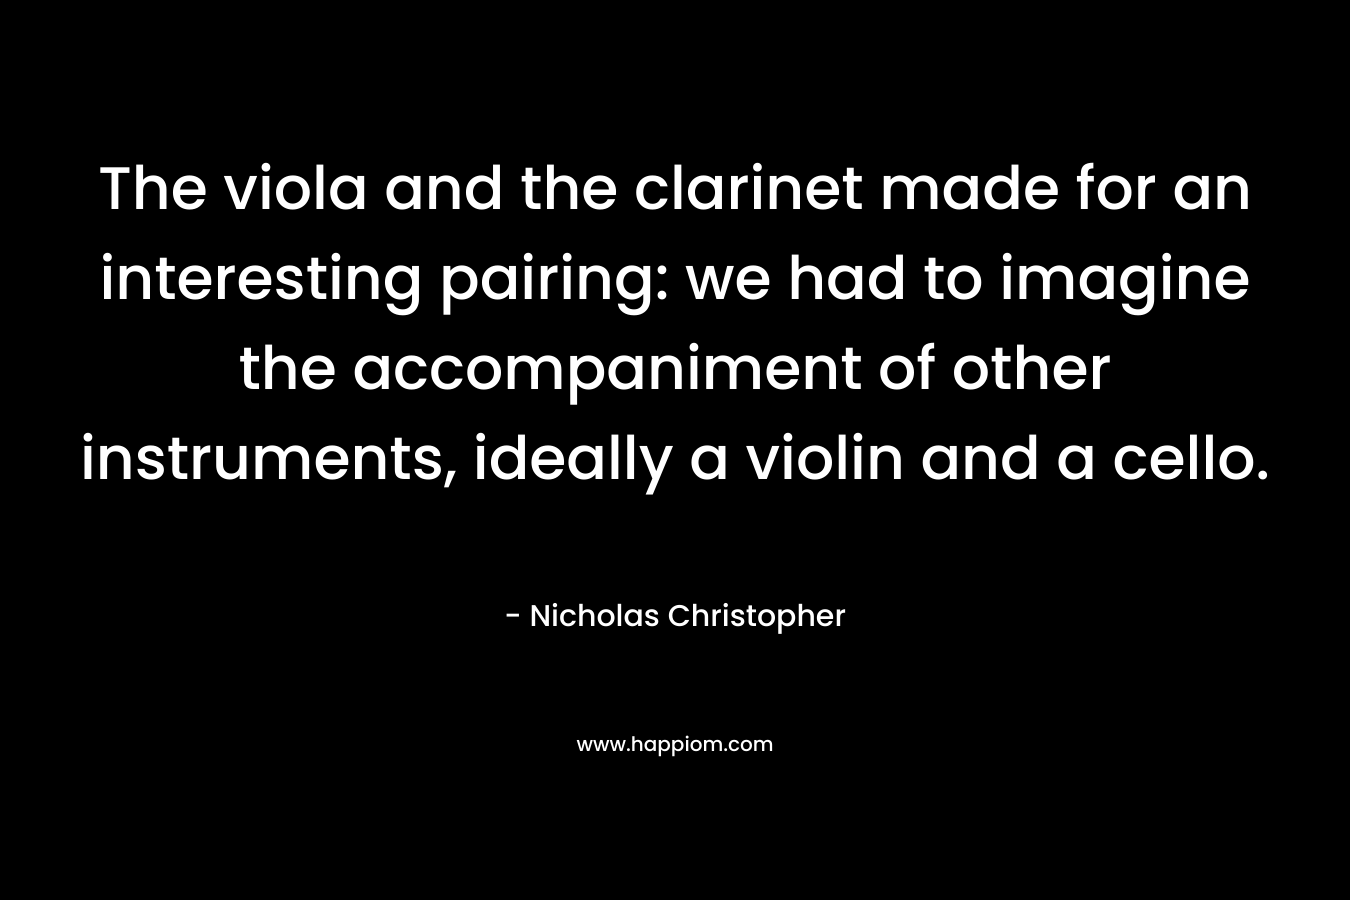 The viola and the clarinet made for an interesting pairing: we had to imagine the accompaniment of other instruments, ideally a violin and a cello.